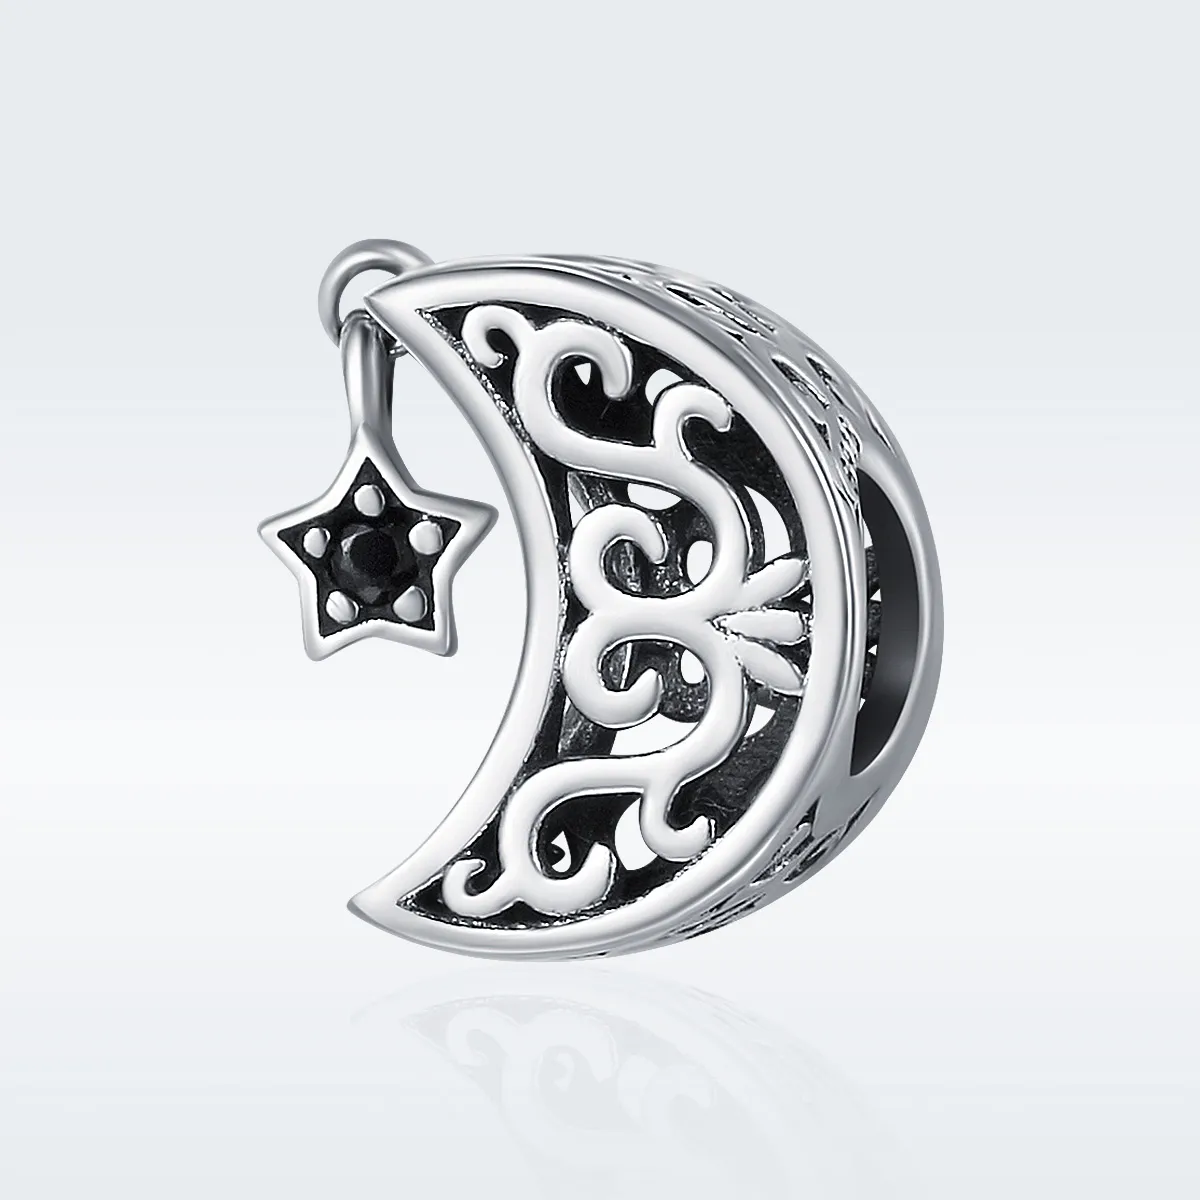 Pandora Style Silver Moon And Star Charm - SCC483